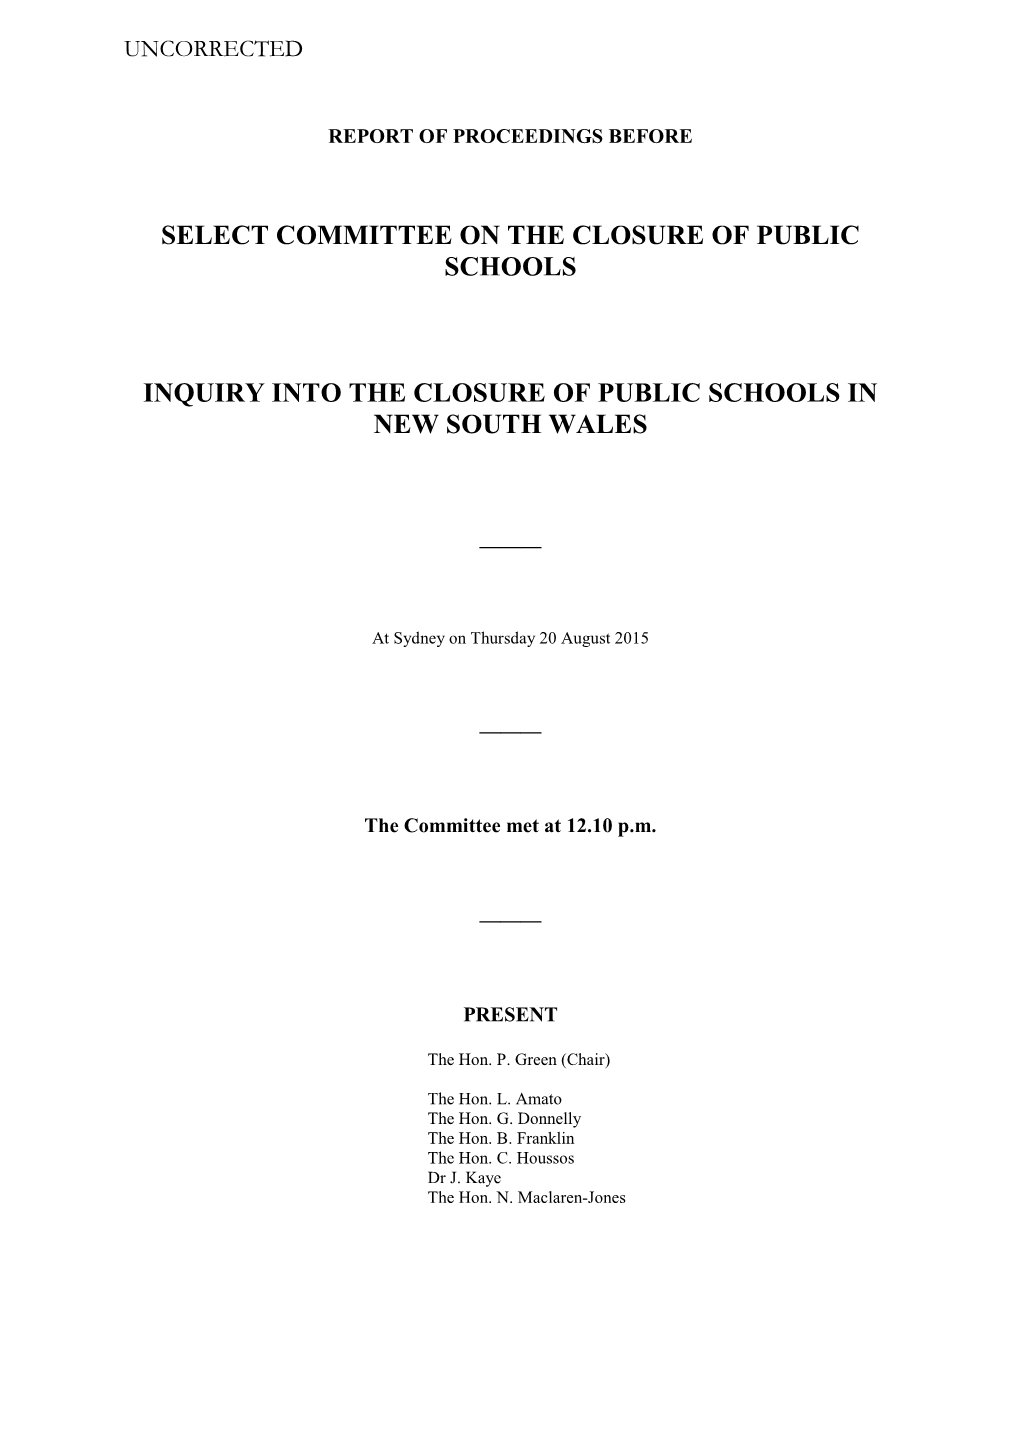 Select Committee on the Closure of Public Schools Inquiry Into the Closure of Public Schools in New South Wales